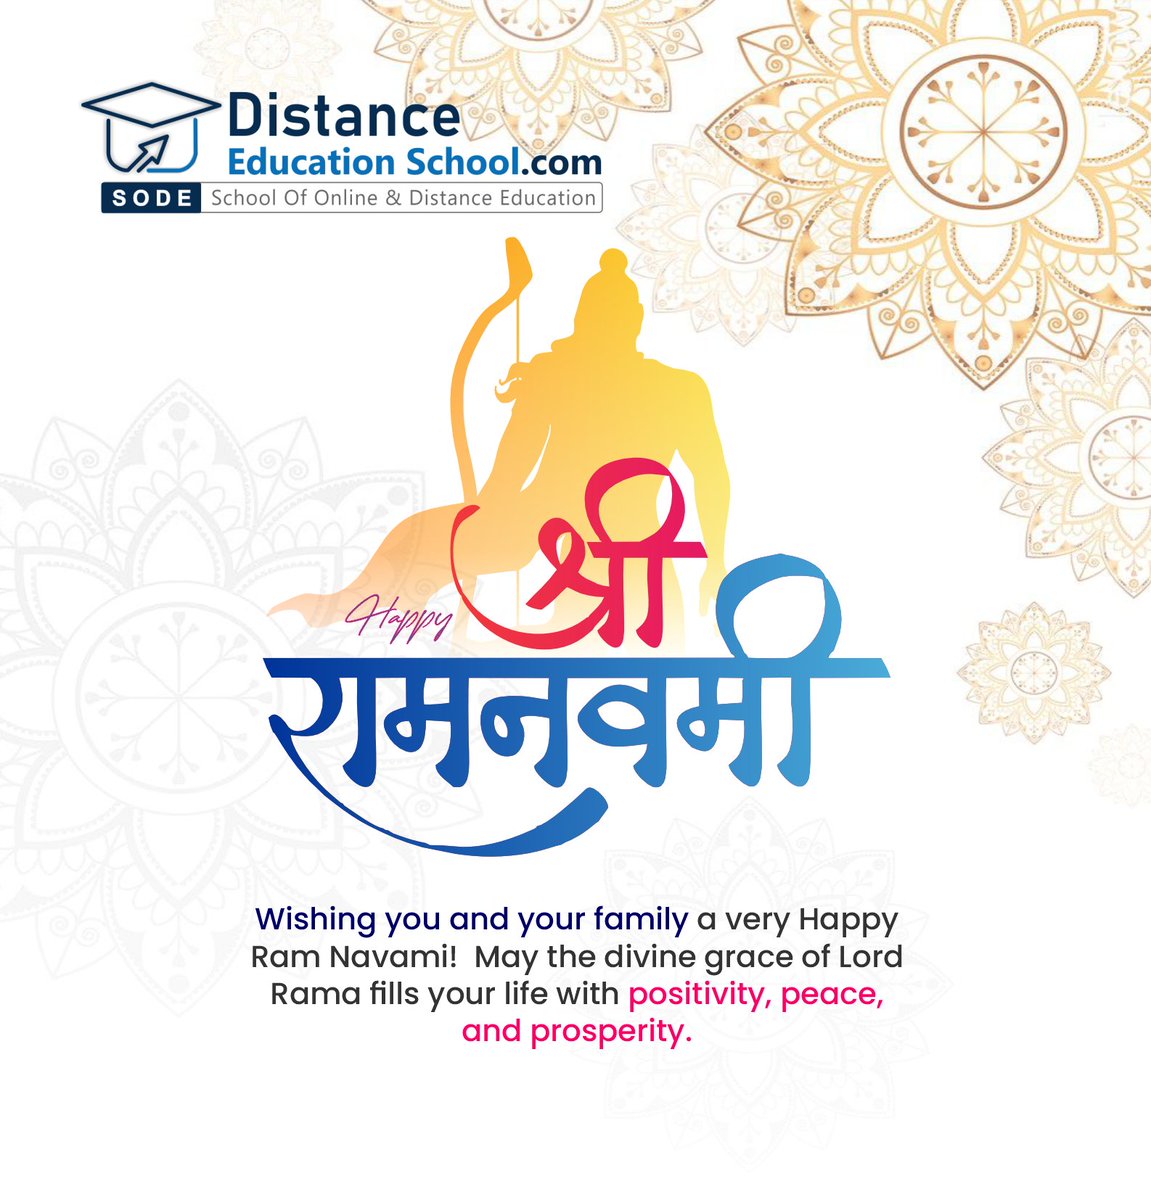 On this beautiful and auspicious occasion of Ram Navami, May the blessings of Lord Rama brings devotion, contentment and harmony in your life. . Visit : distanceeducationschool.com . #happyramnavmi #ramnavmi #distanceeducationschool #OnlineLearning #CourseSelection #EducationGoals